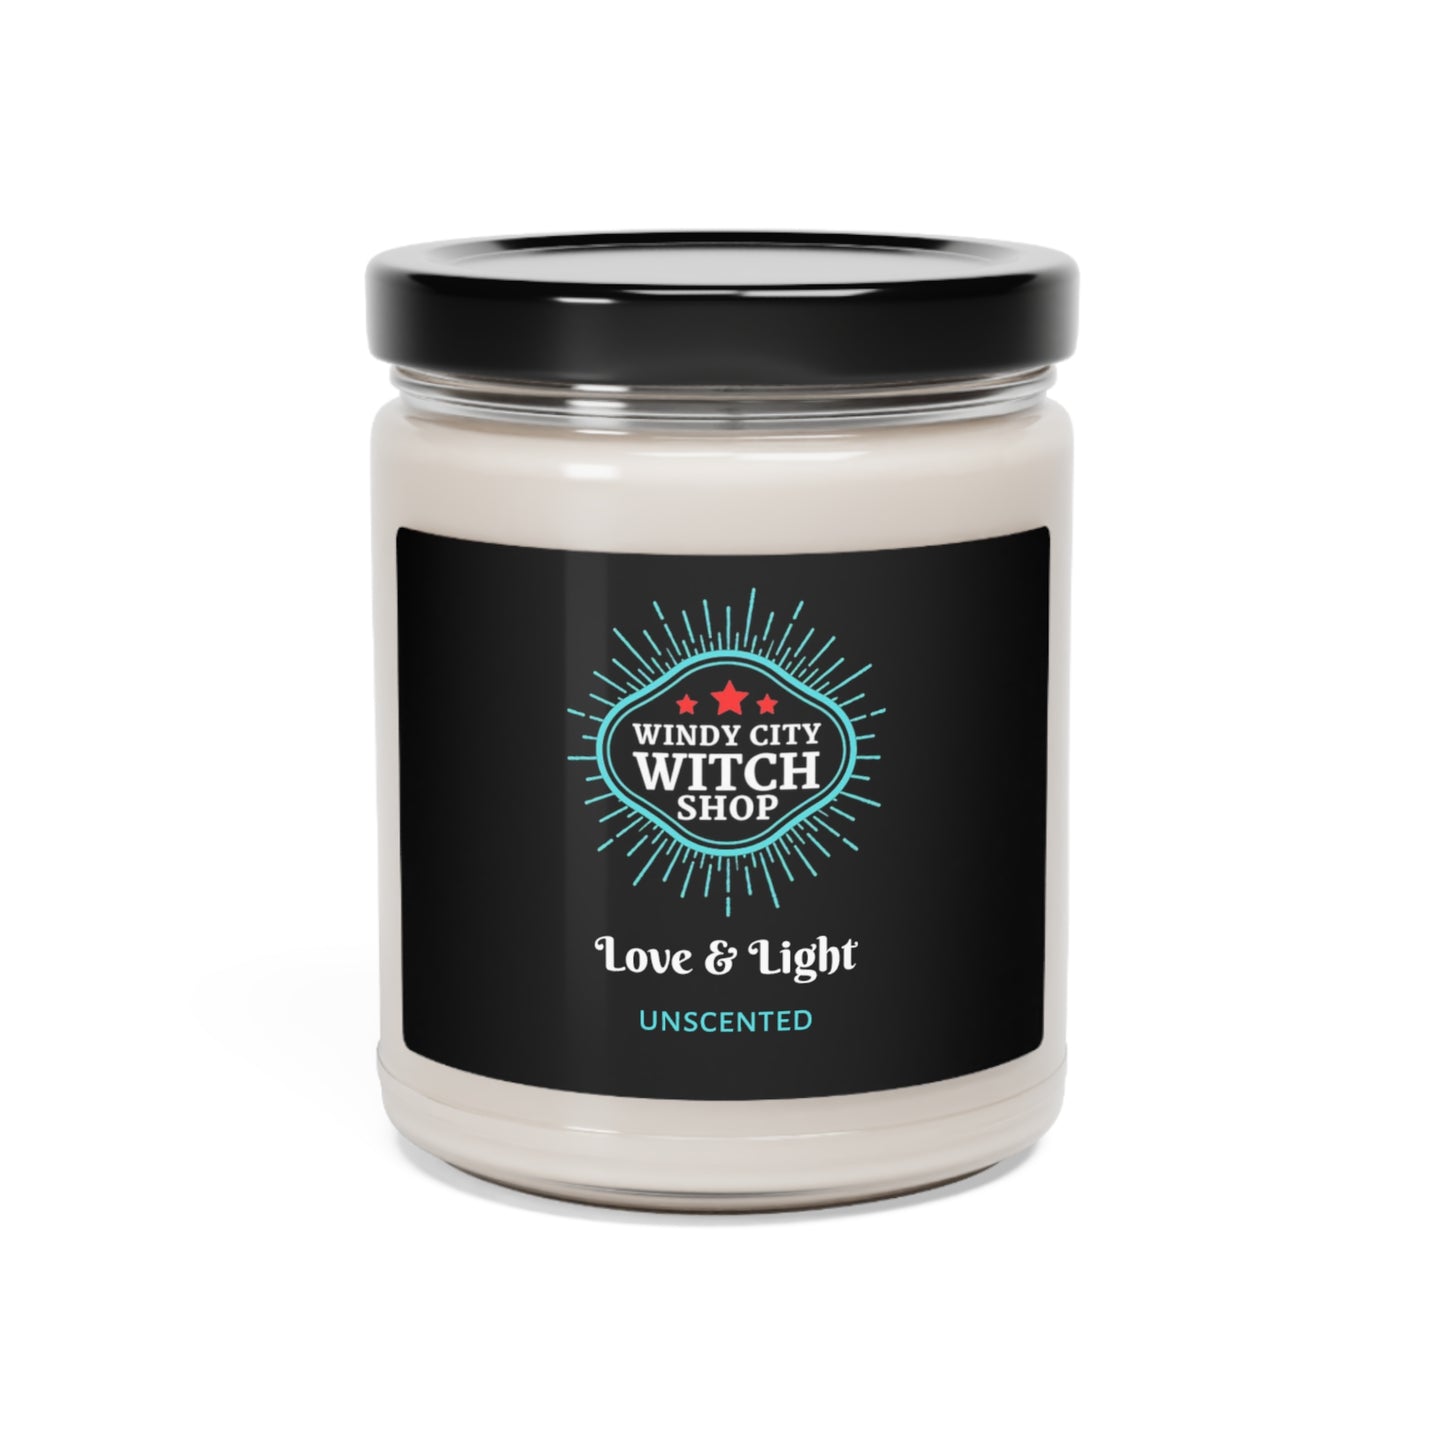 Love & Light Unscented Soy Candle